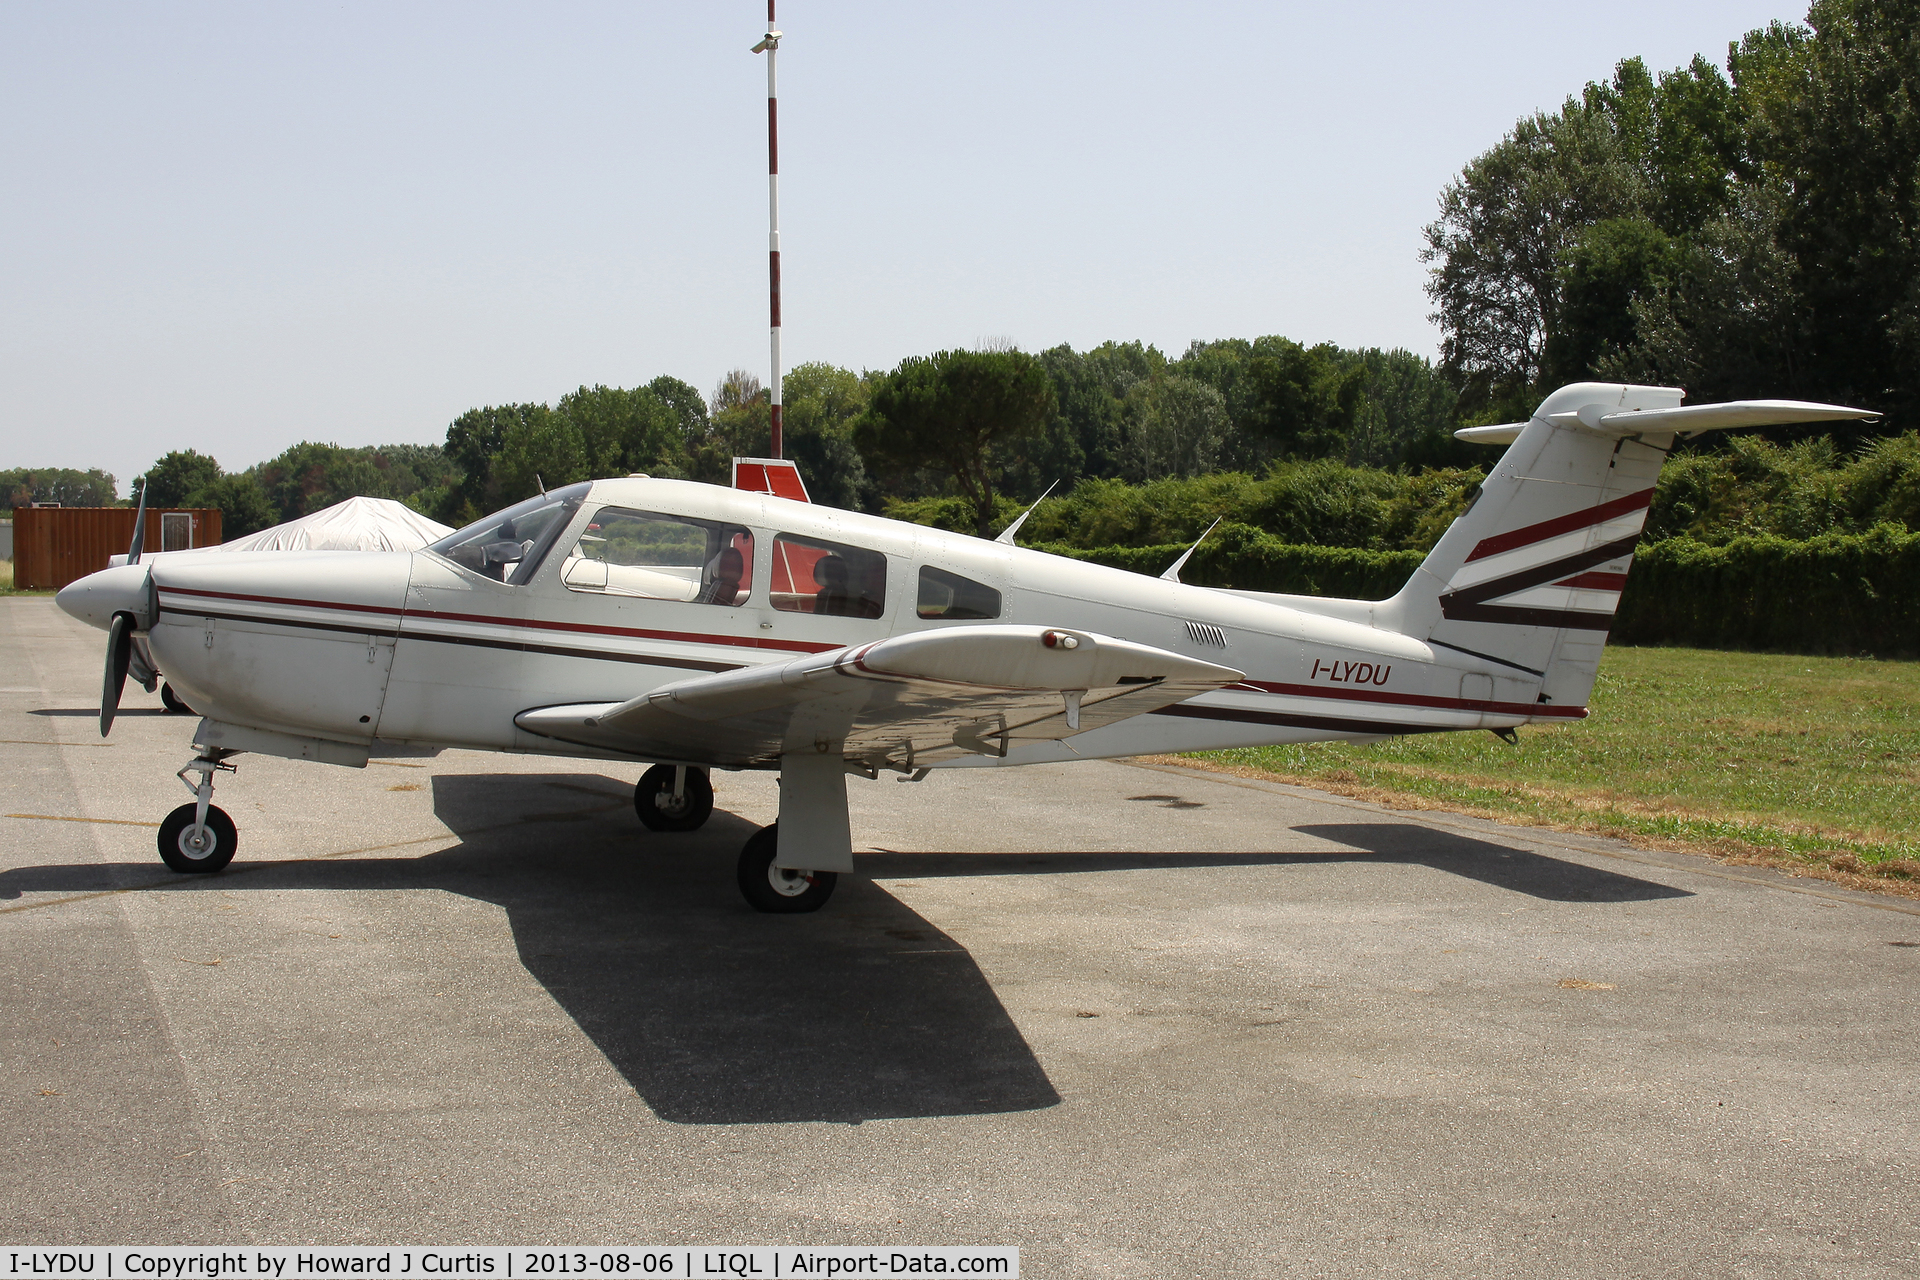 I-LYDU, 1981 Piper PA-28RT-201 Arrow IV Arrow IV C/N 28R-8118047, Privately owned, a resident here.